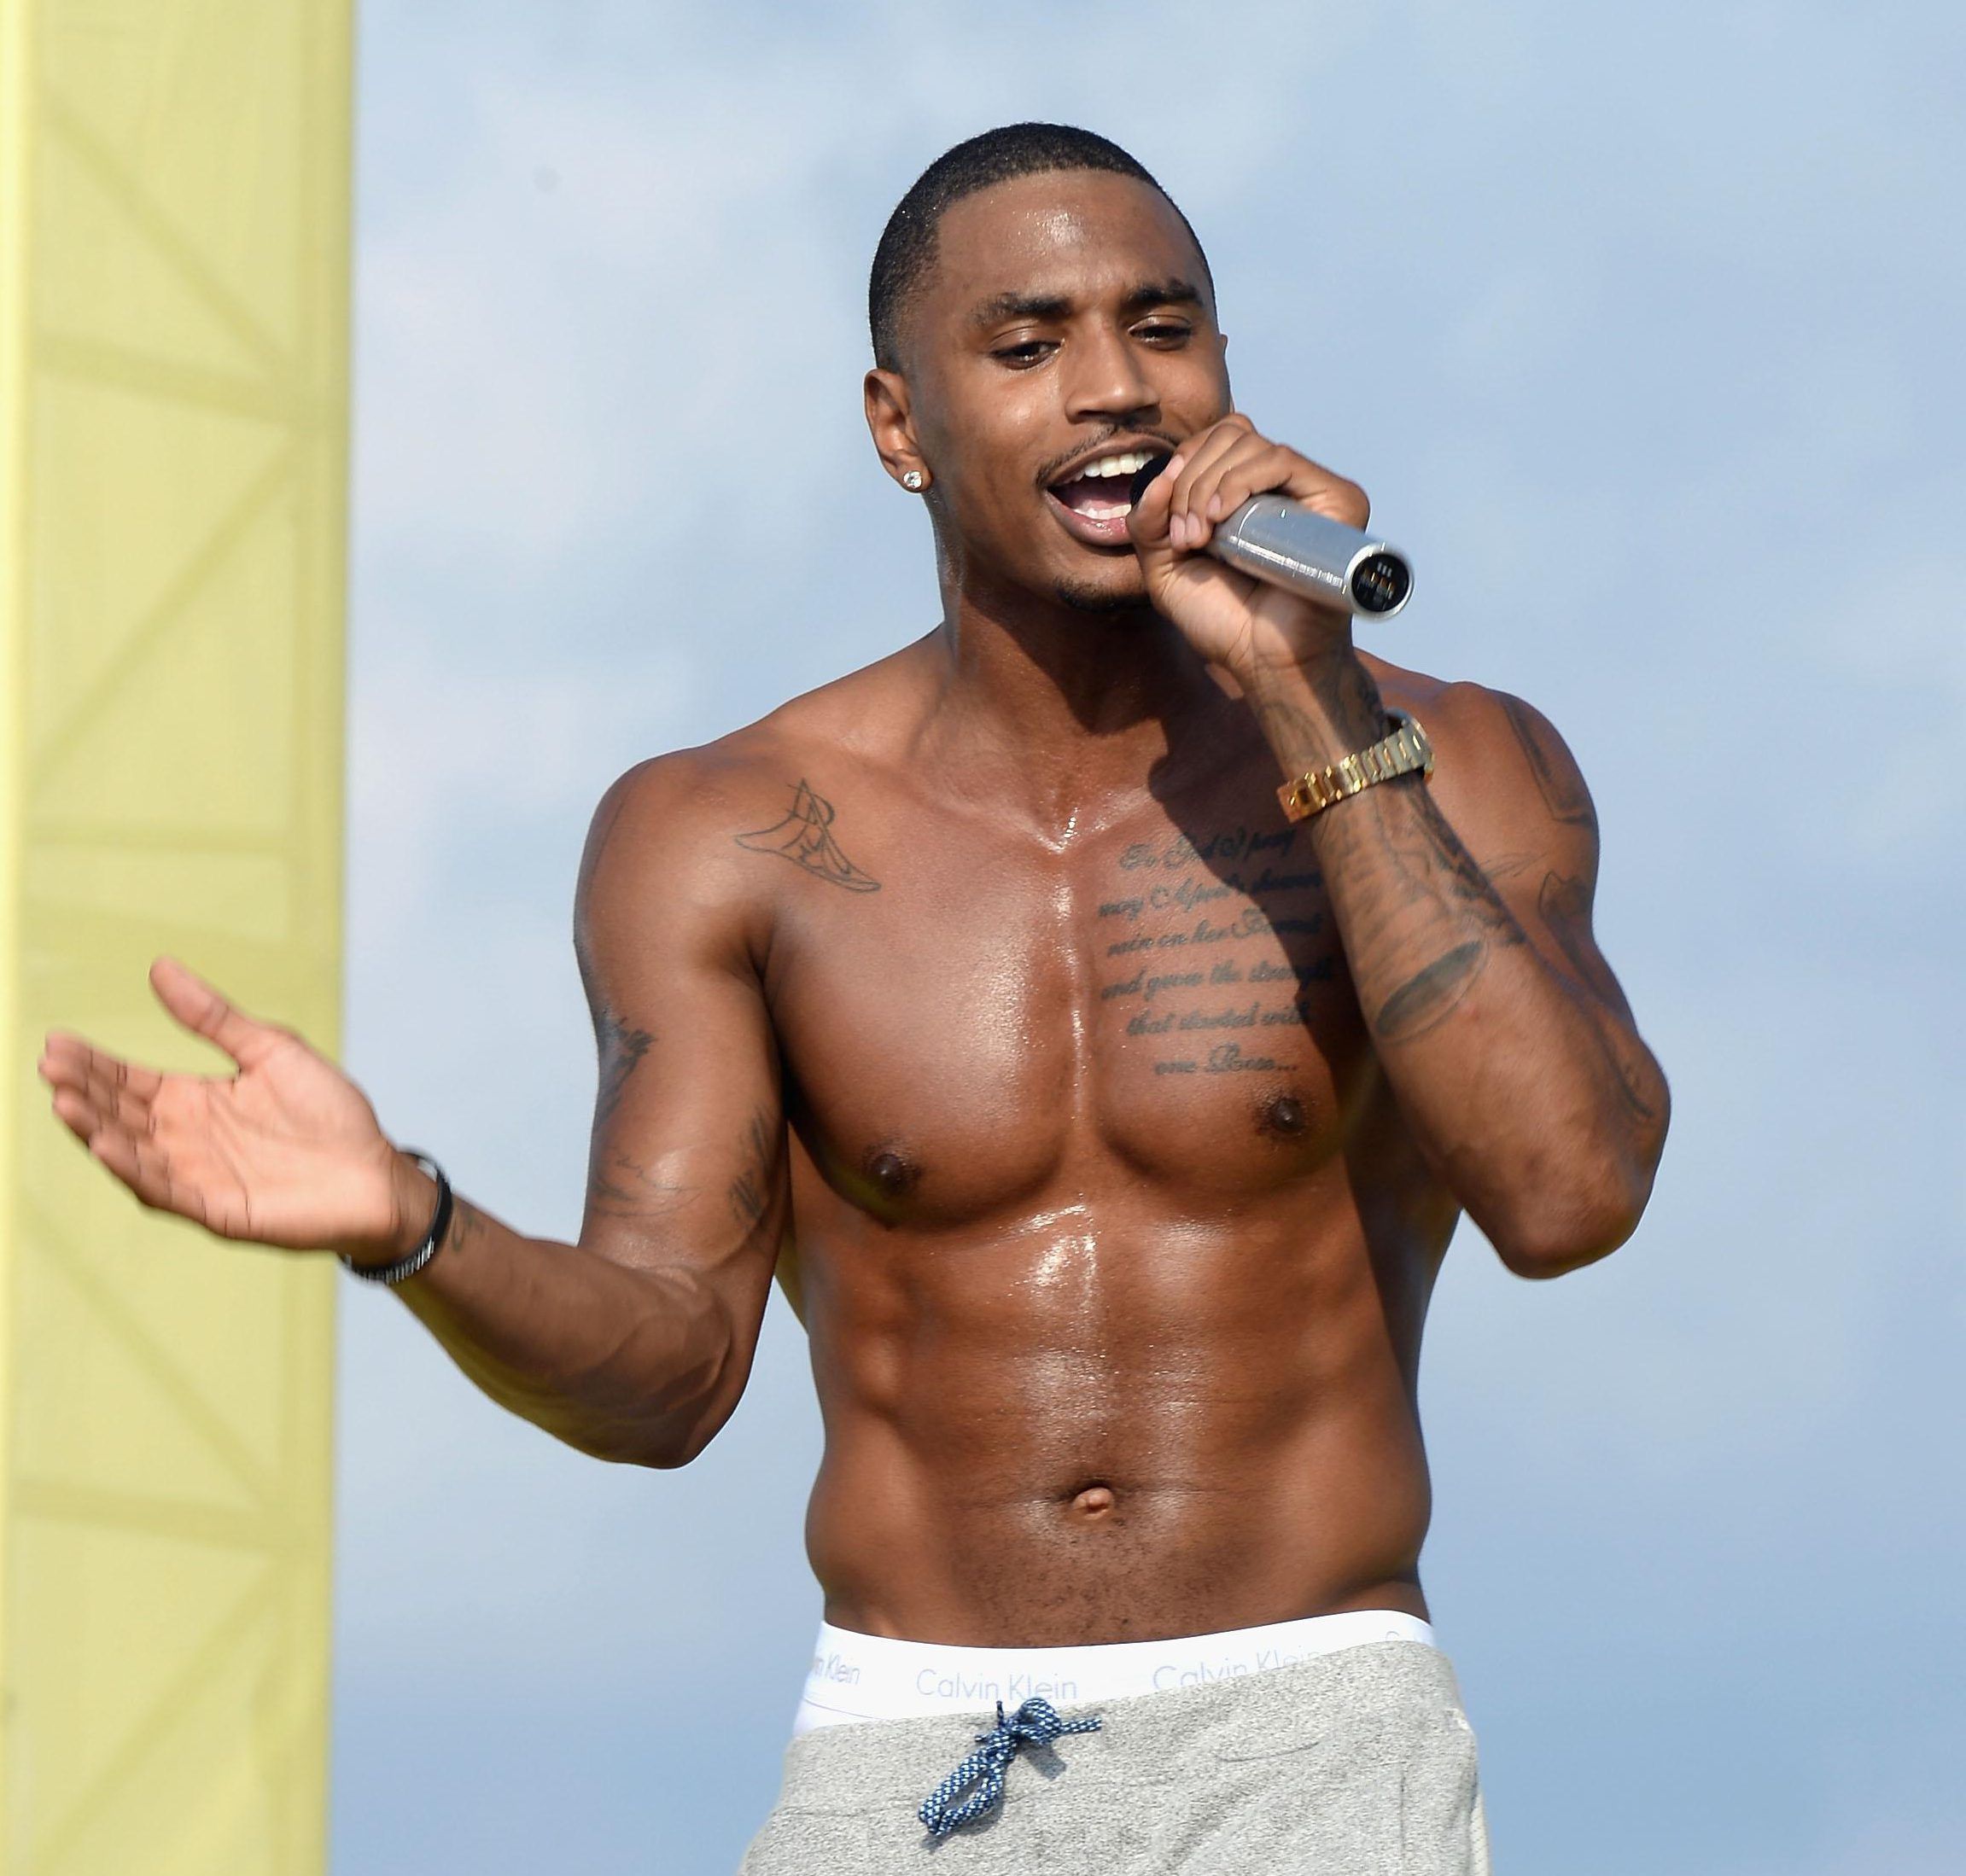 Trey Songz turned himself in for slapping two people in NYC